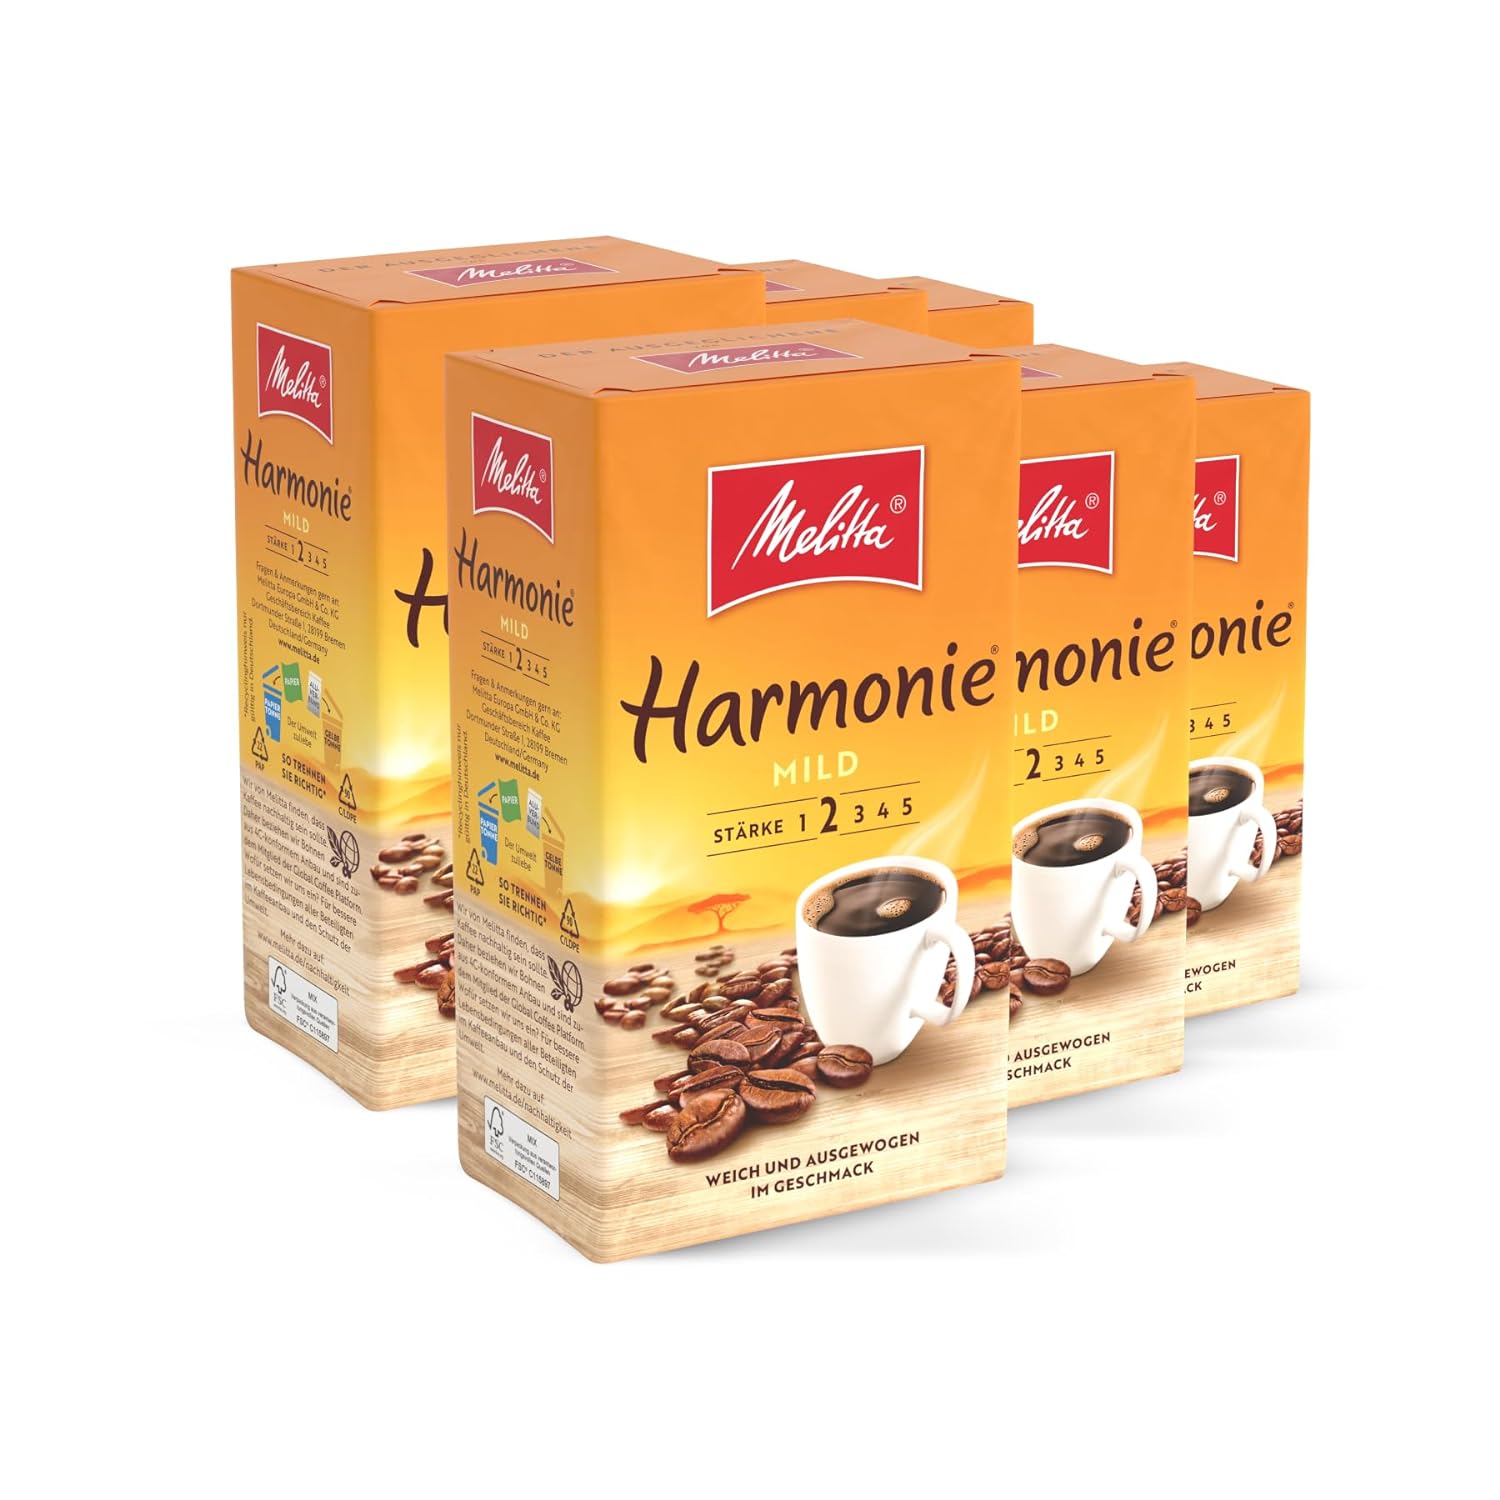 Melitta Harmonie Mild Filter Coffee 6 x 500 g, Ground, Powder for Filter Coffee Machines, Mild Roasting, Roasted in Germany, in Tray